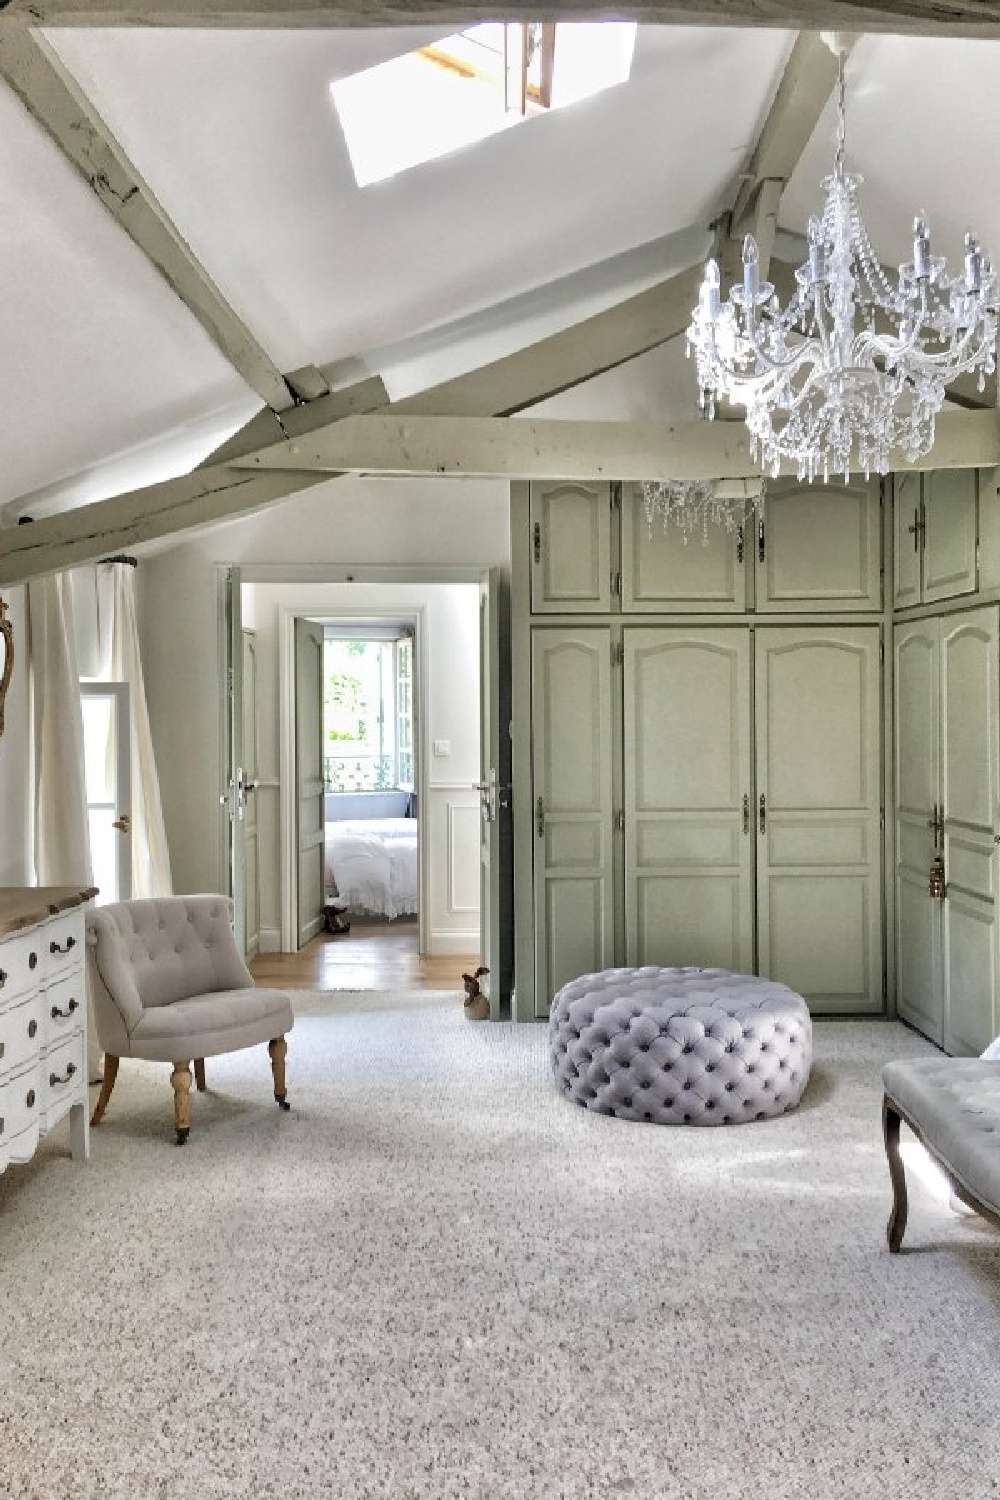 Dressing room with beautiful built-ins in a French farmhouse bedroom - Vivi et Margot.